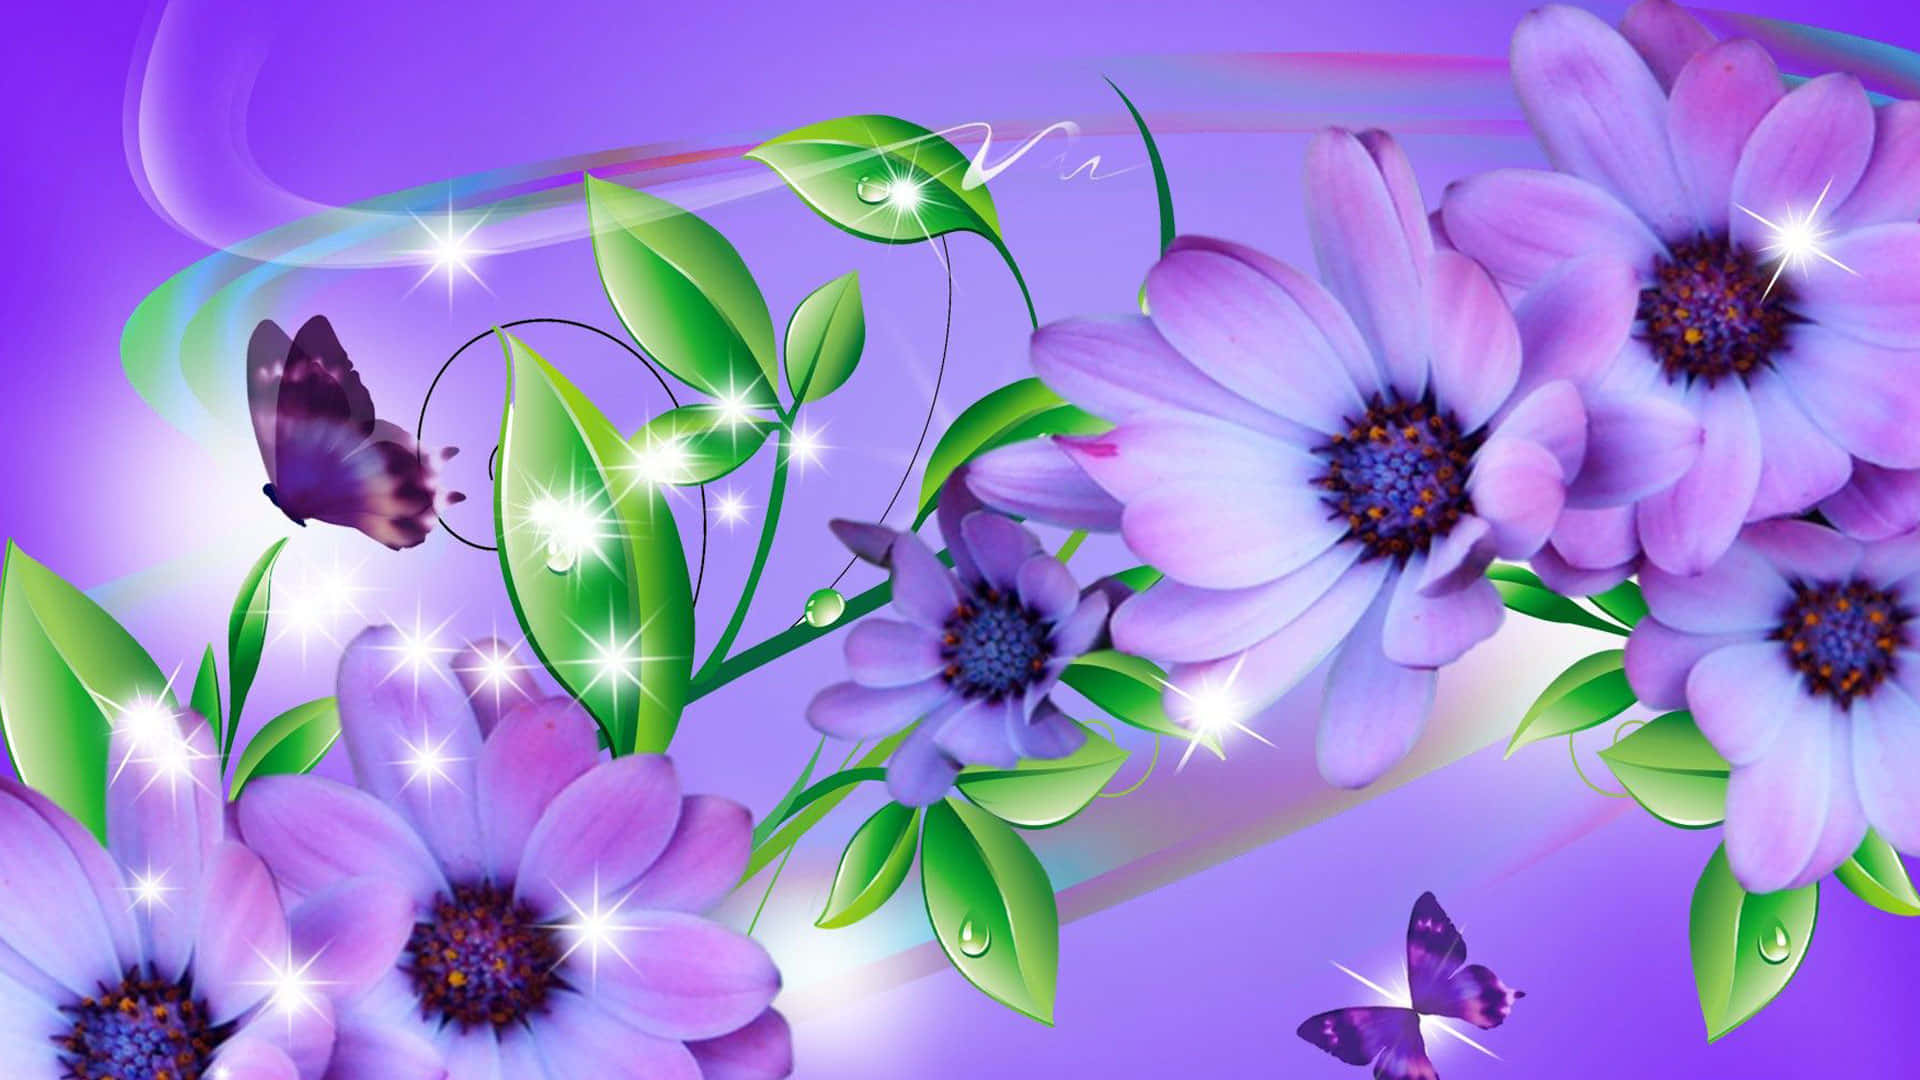 "The Beauty of Nature: A Blooming Flower" Wallpaper